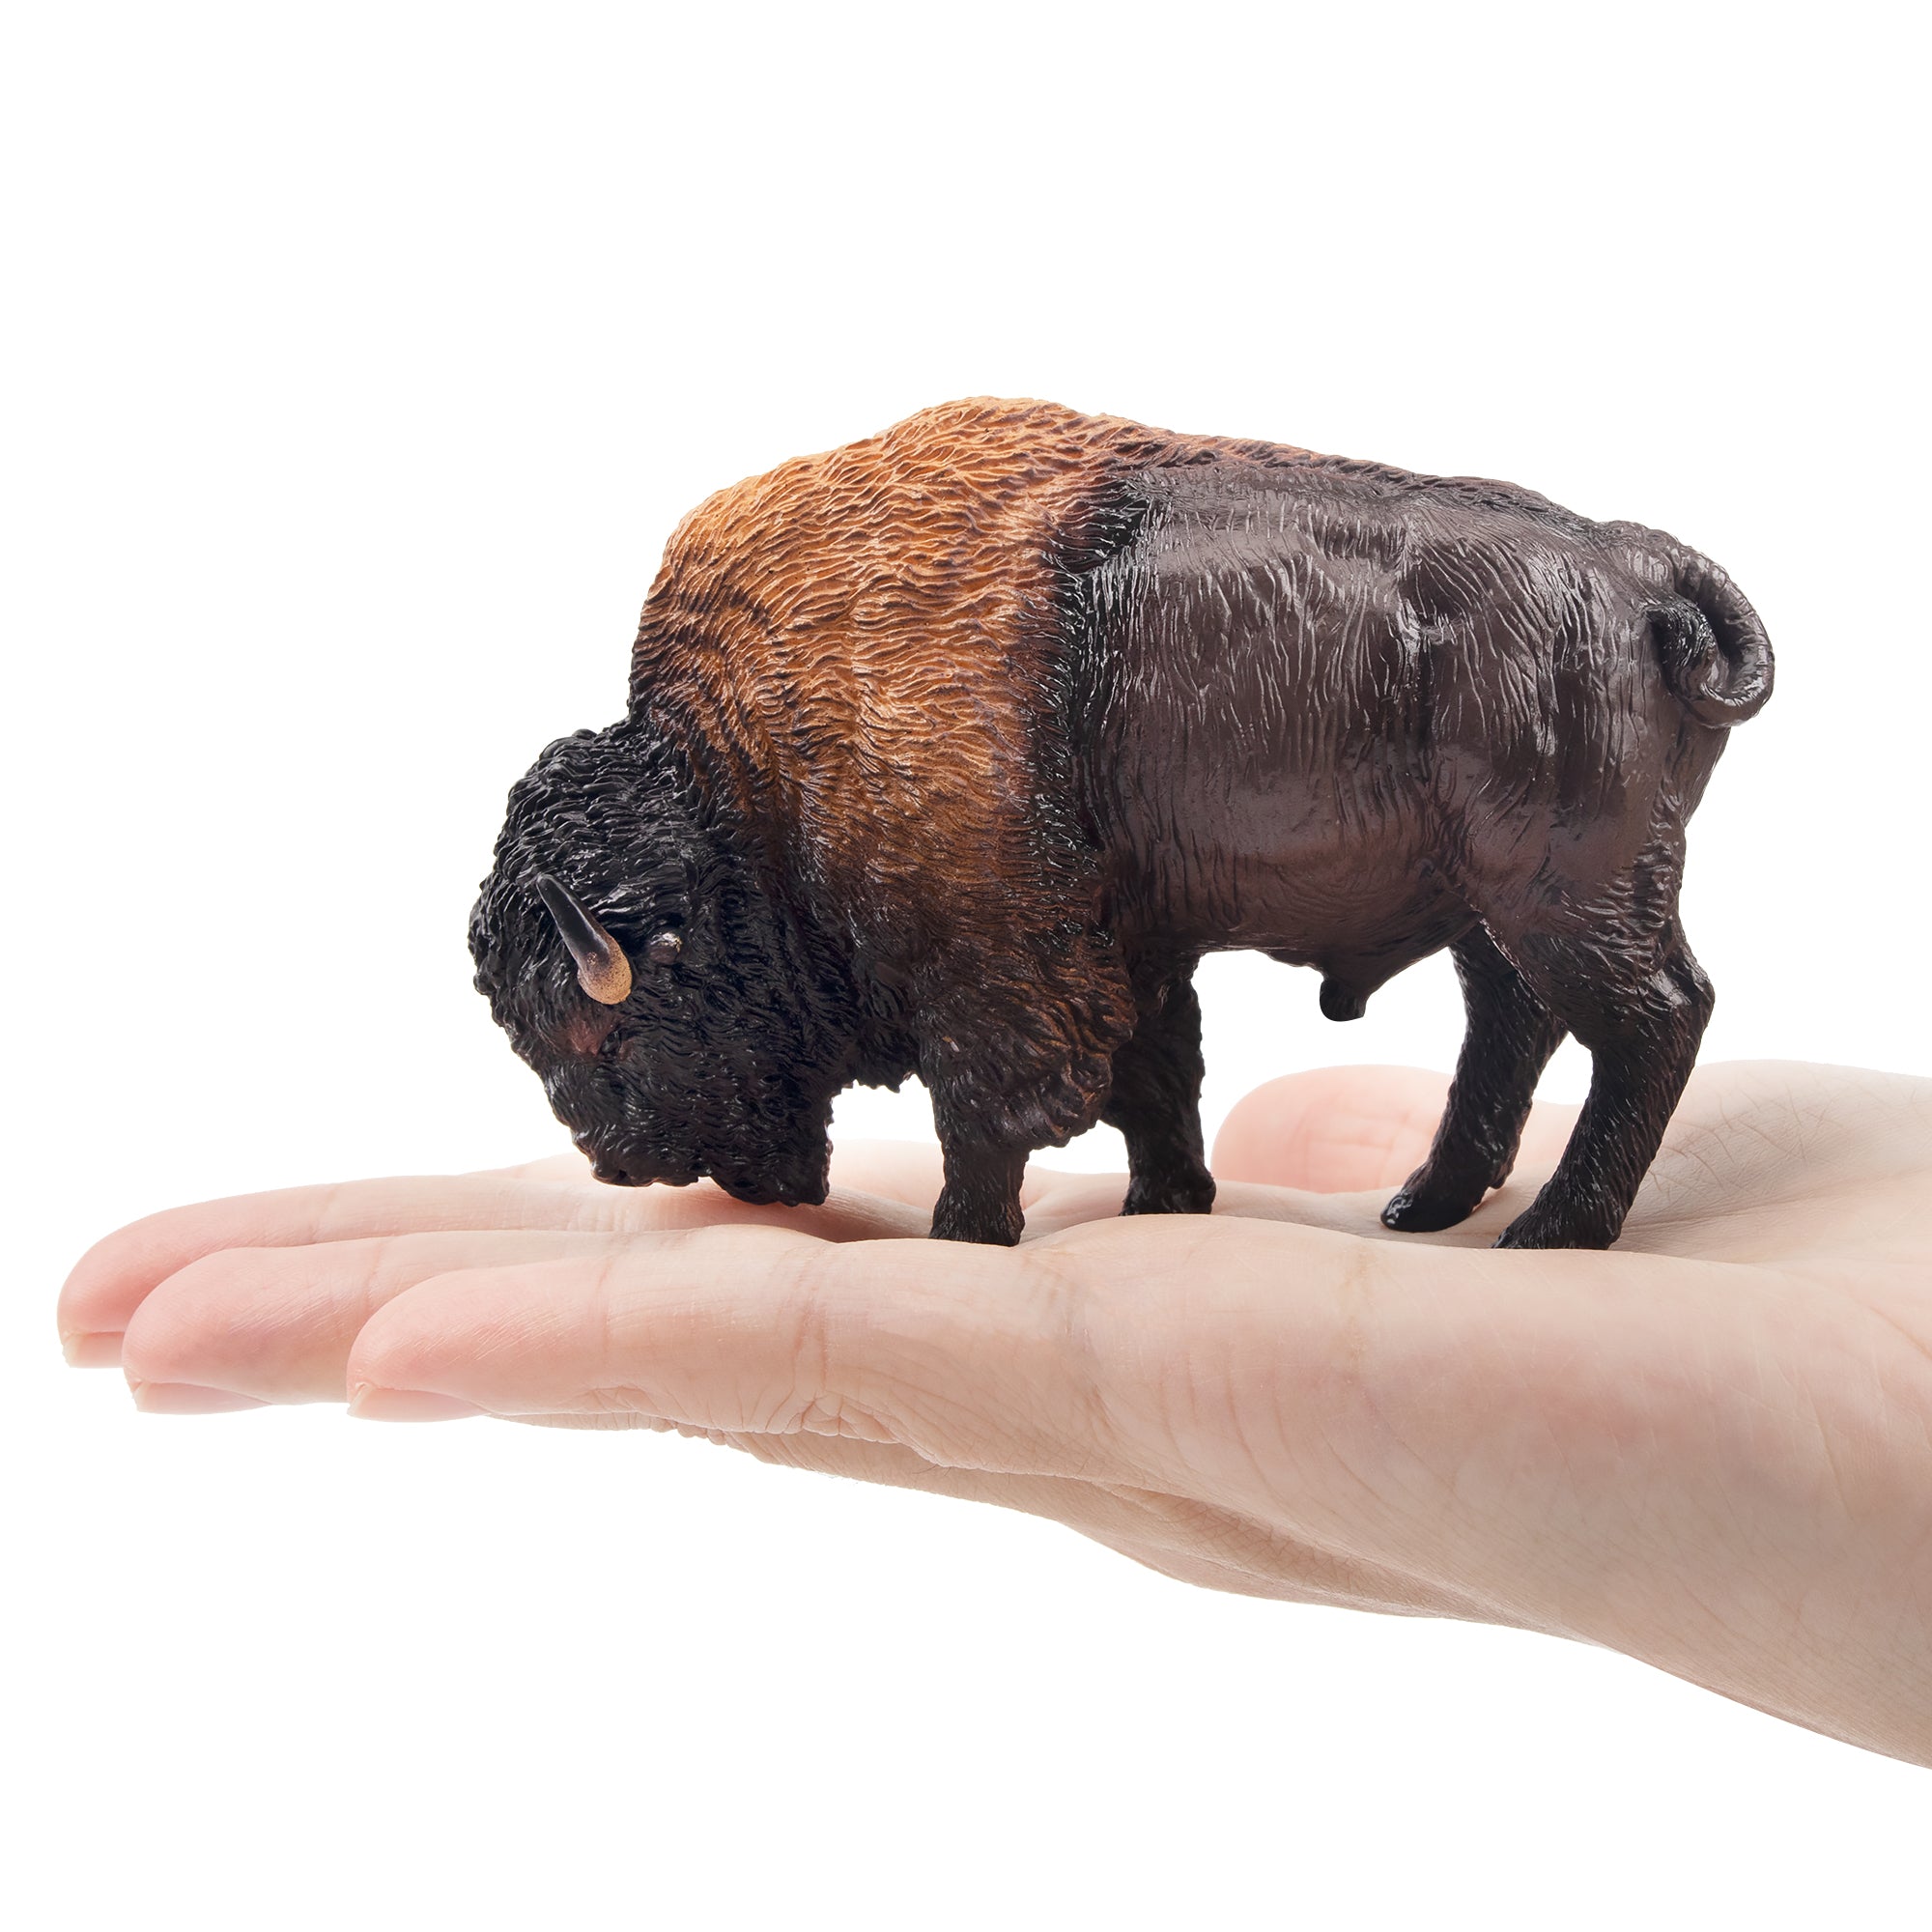 Toymany American Bison Figurine Toy-on hand